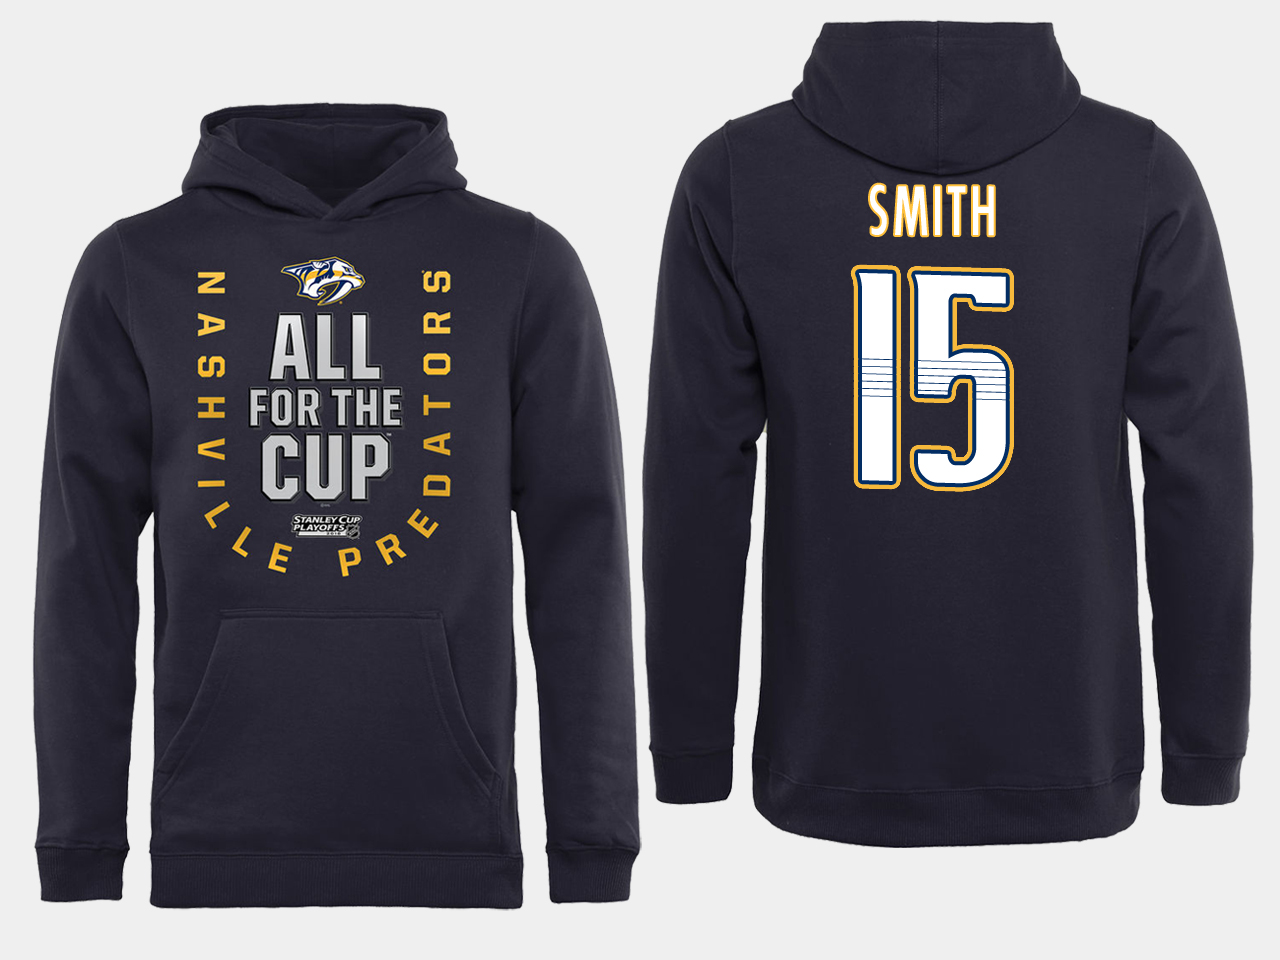 Men NHL Adidas Nashville Predators #16 Smith black ALL for the Cup hoodie